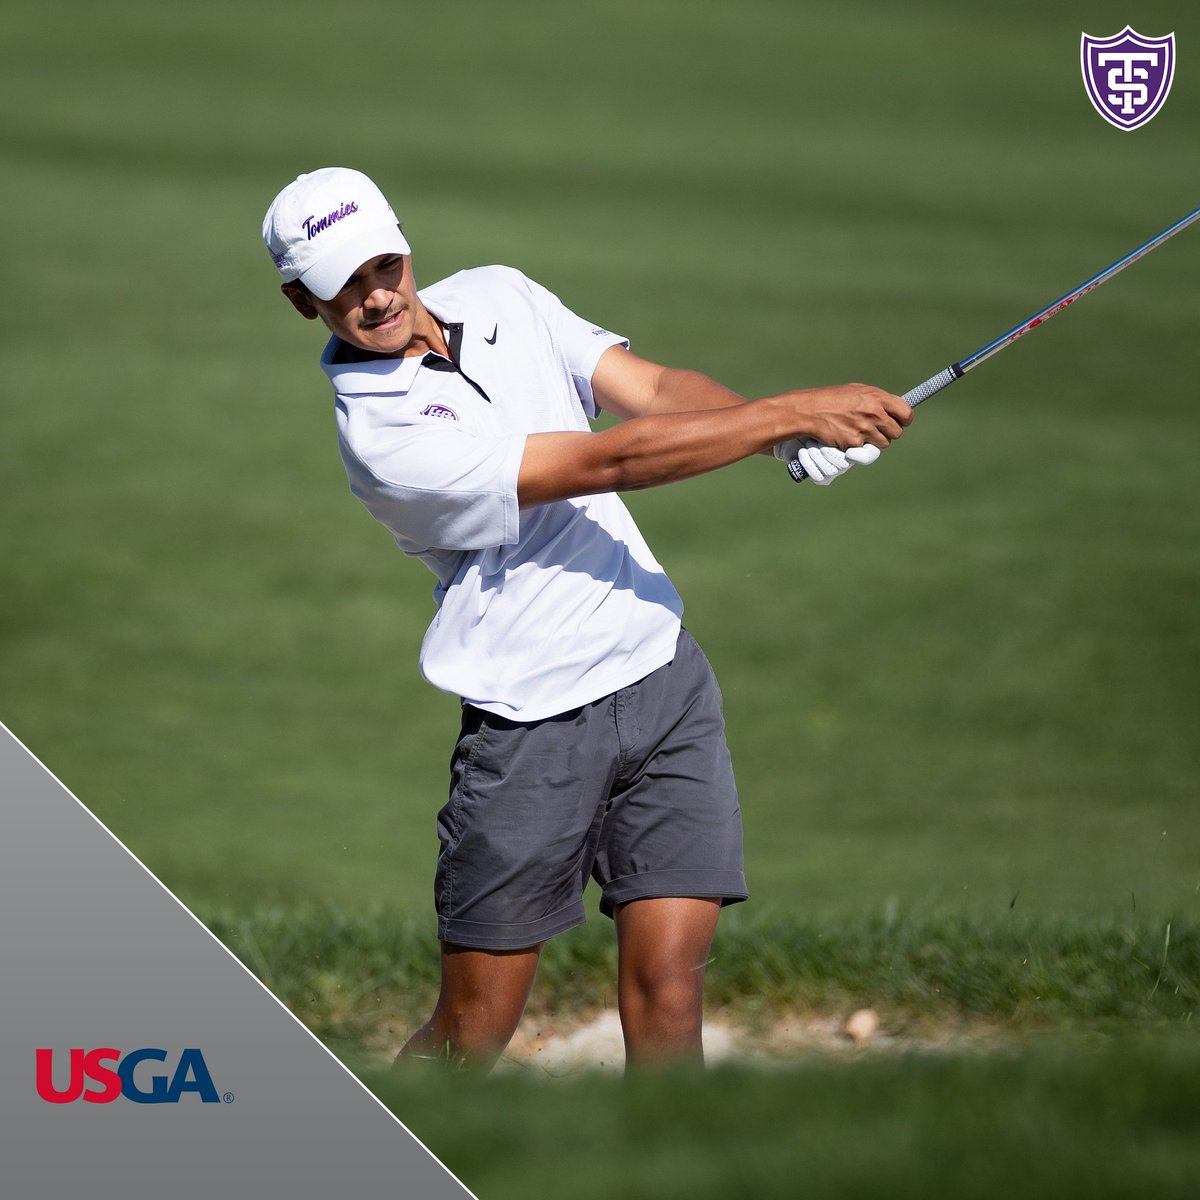 Congratulations and good luck to our very own Owen Rexing as he competes next Monday in Bend, Oregon for a chance to qualify for the US Open. 

The 36-hole final stage of qualifying will take place at Pronghorn Resort!

#RollToms